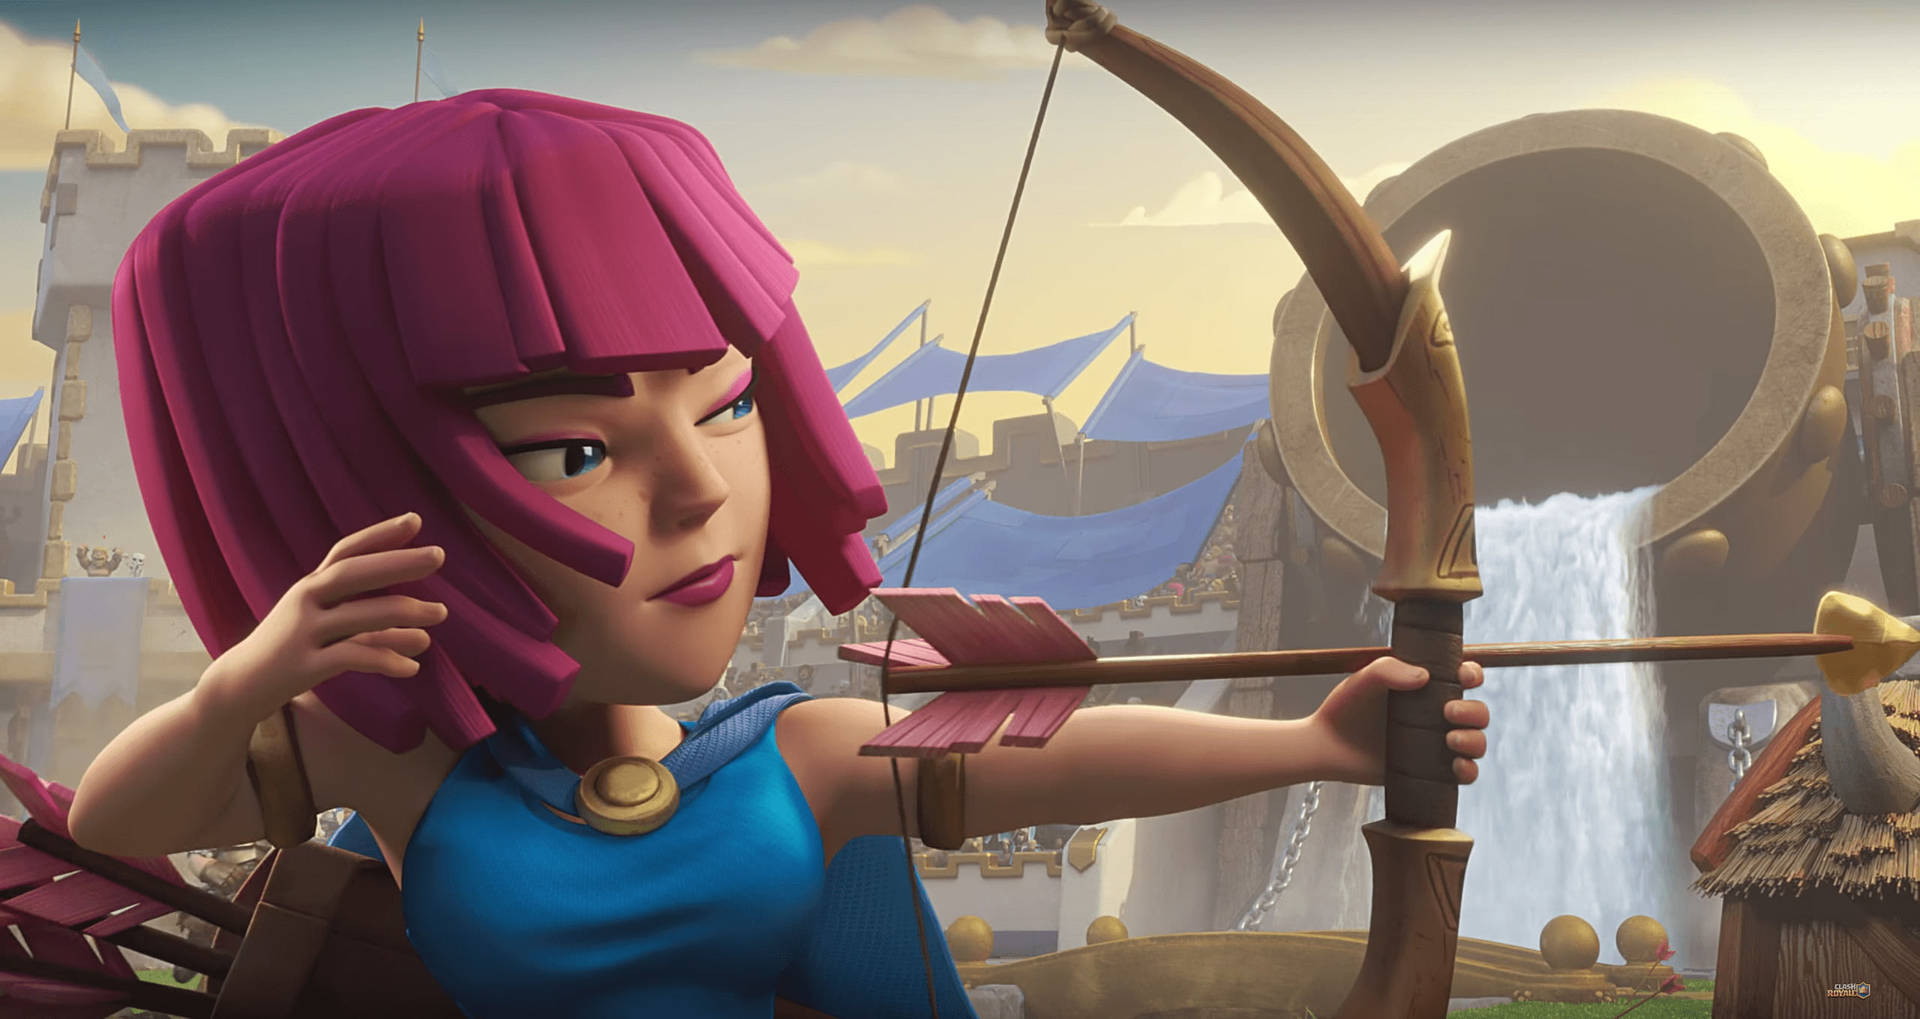 Download Archer With A Bow Clash Of Clans Wallpaper 